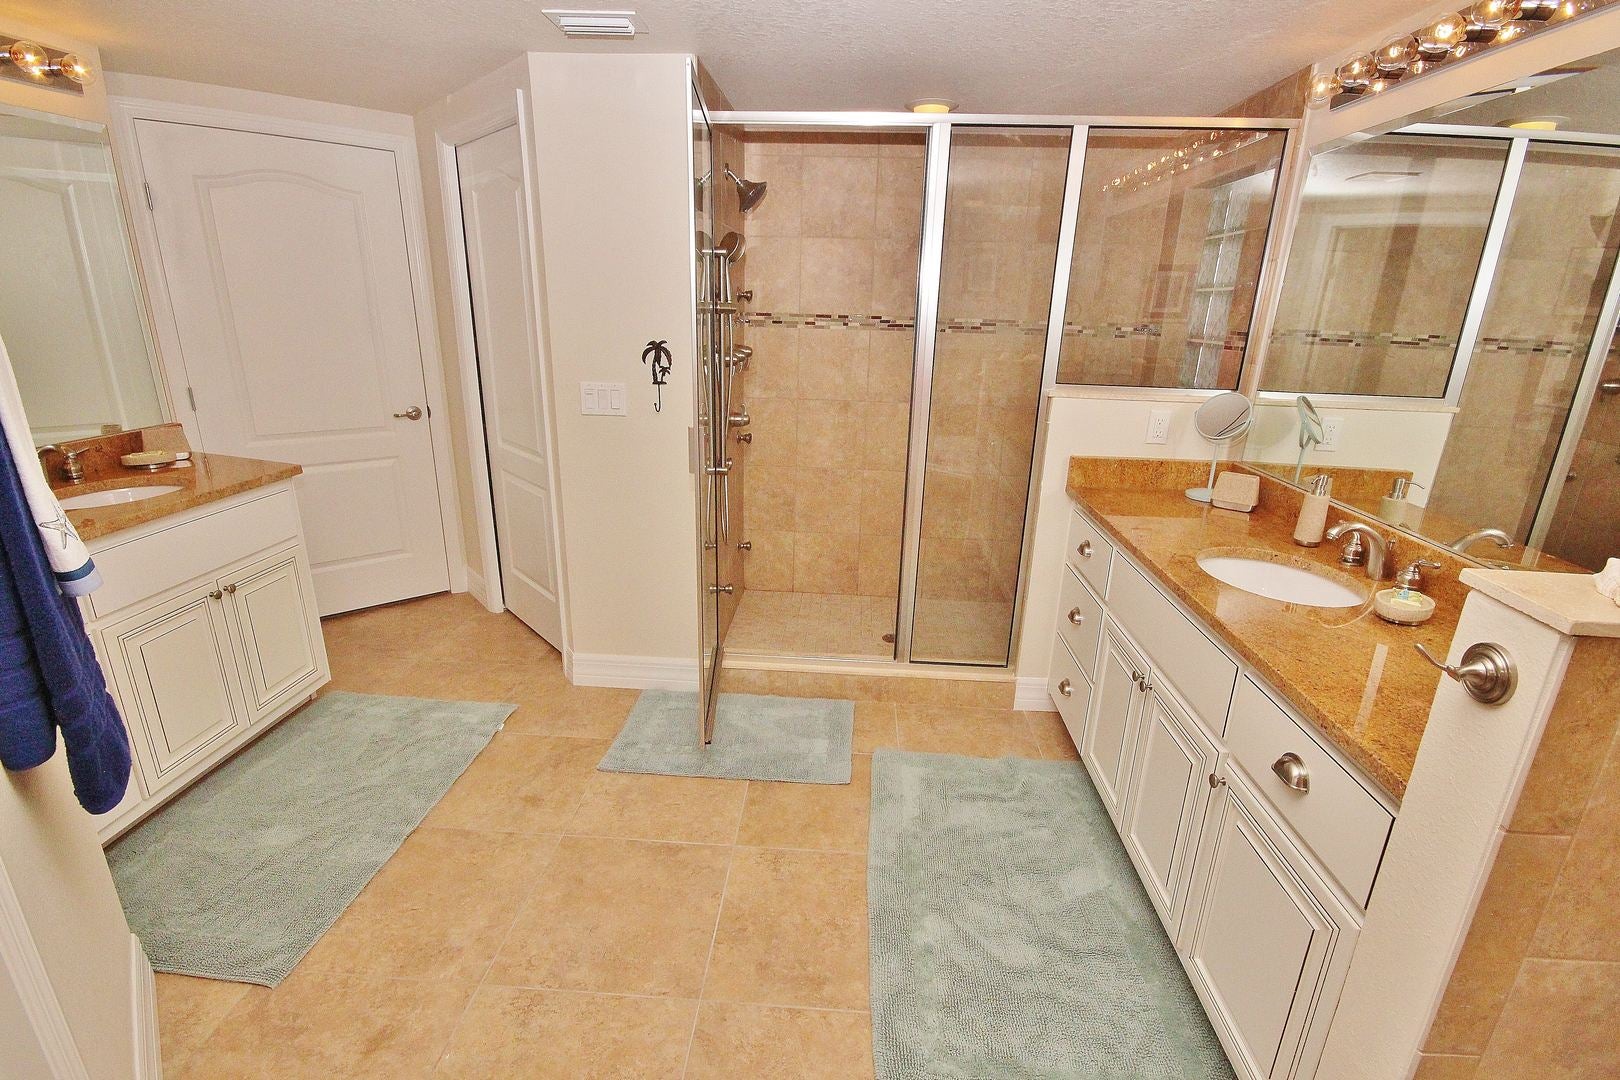 Primary bathroom with shower